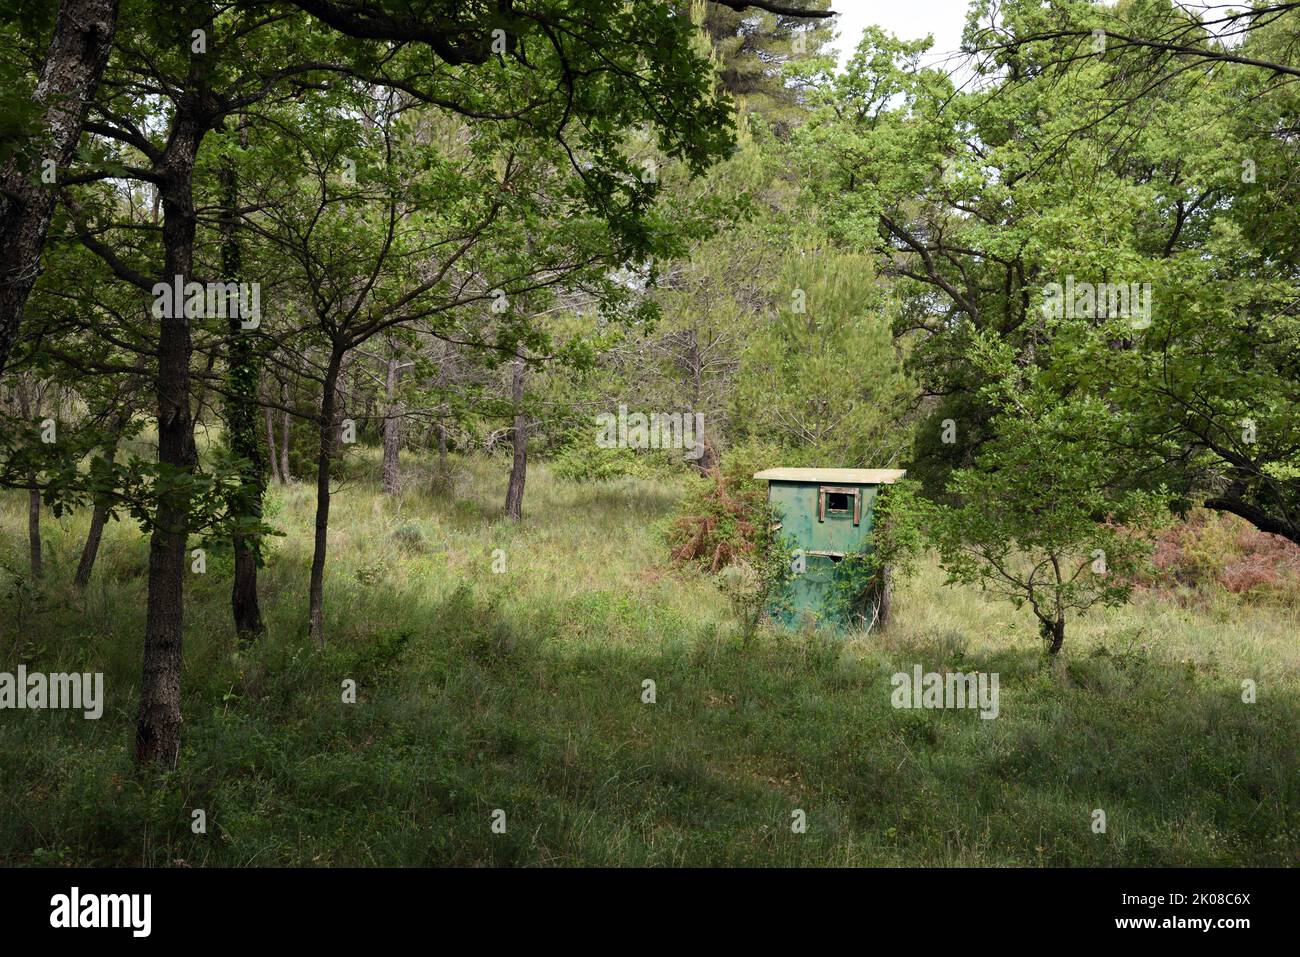 Green Wooden Hut, Hunting Hide, Hunting Blind or Hunter's Hide in Forest Provence France Stock Photo